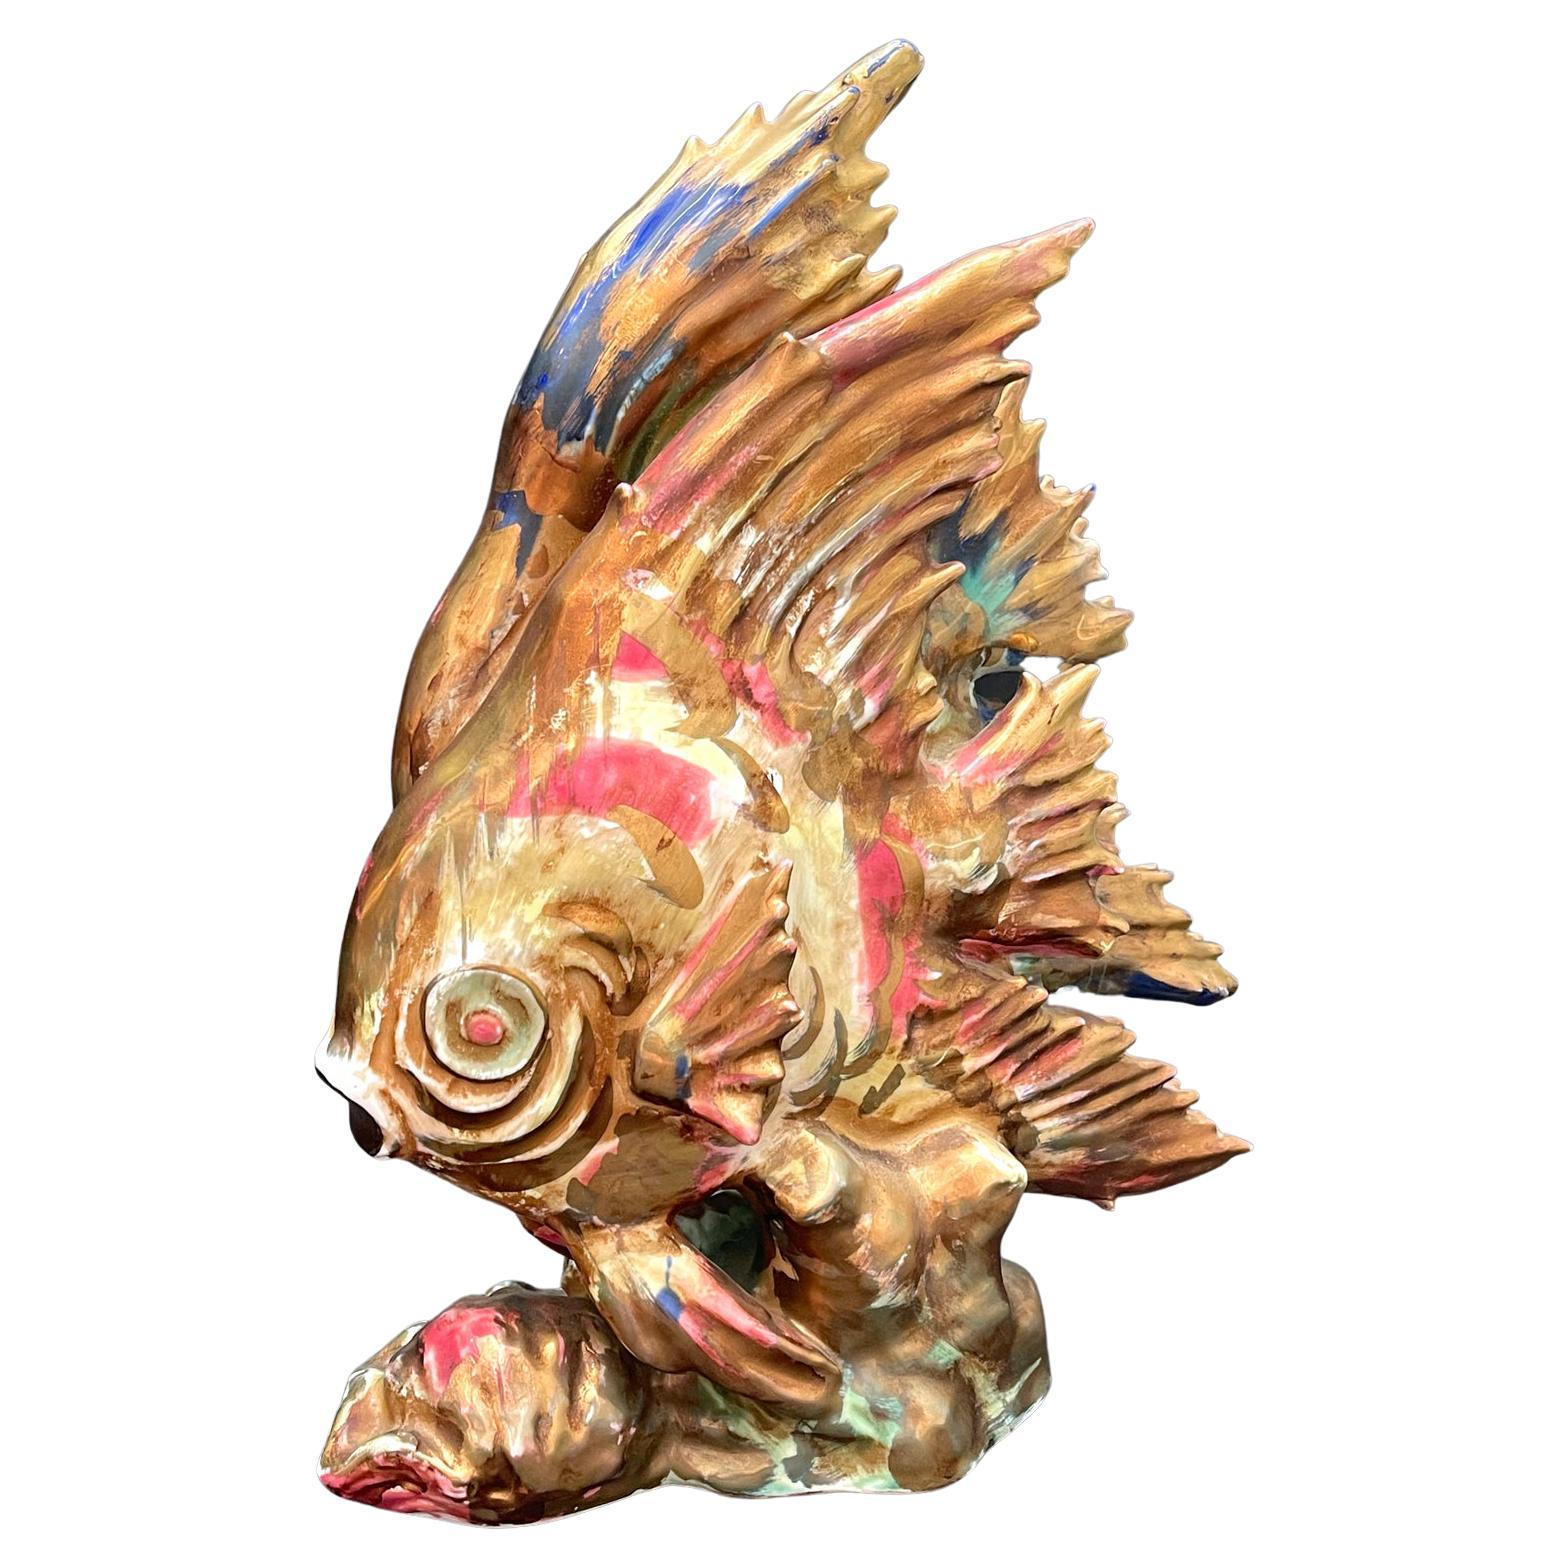 This pair of technicolor-hued Art Deco angel fish sculptures -- glazed in hues of gold, dark pink, cobalt, sea green and canary -- was made in Japan between 1945 and 1951, when American forces occupied the nation after World War II and required that